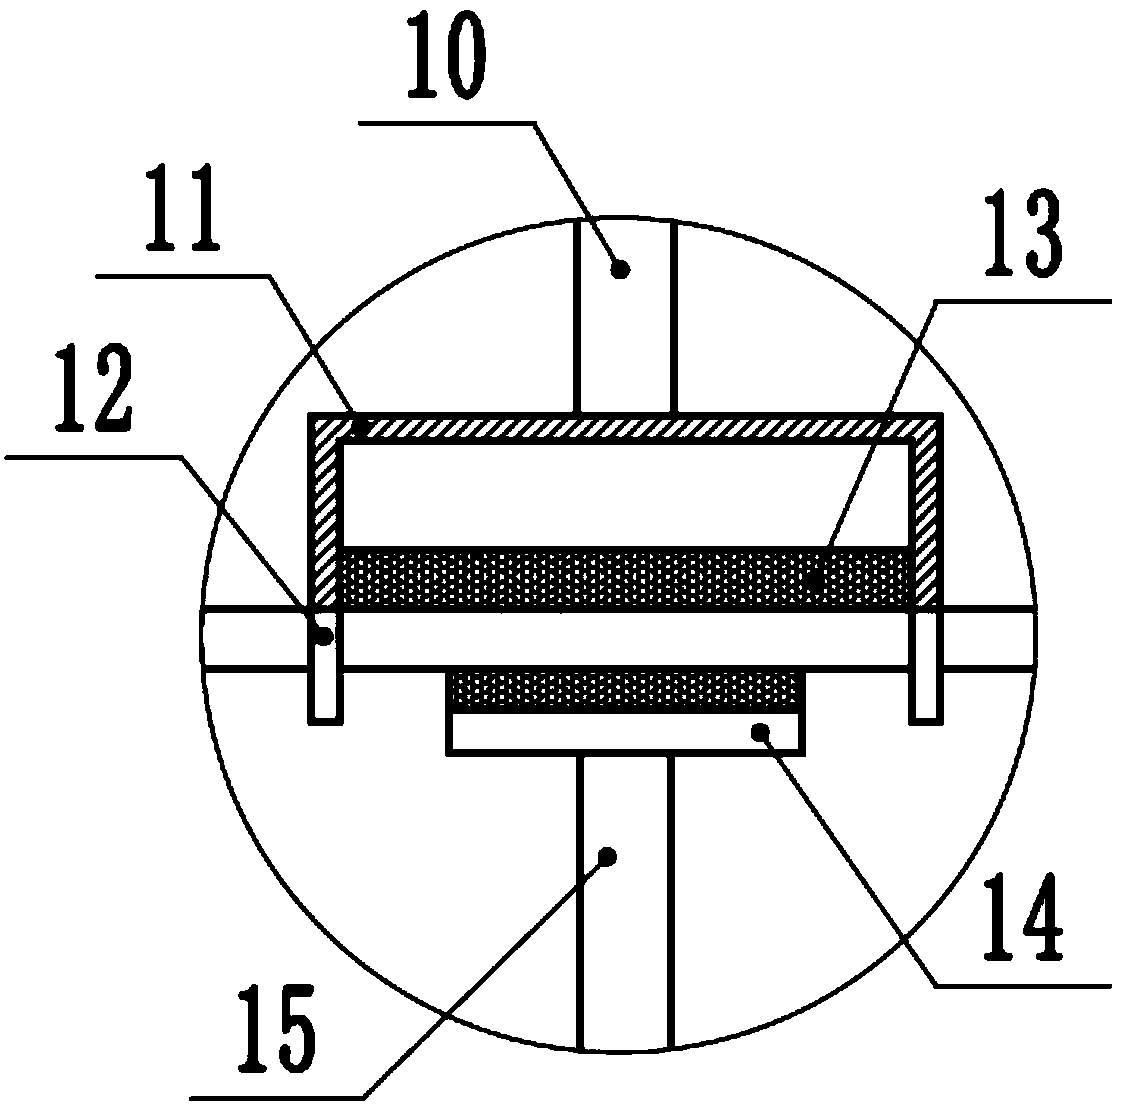 Communication cable rolling and releasing system for communication engineering